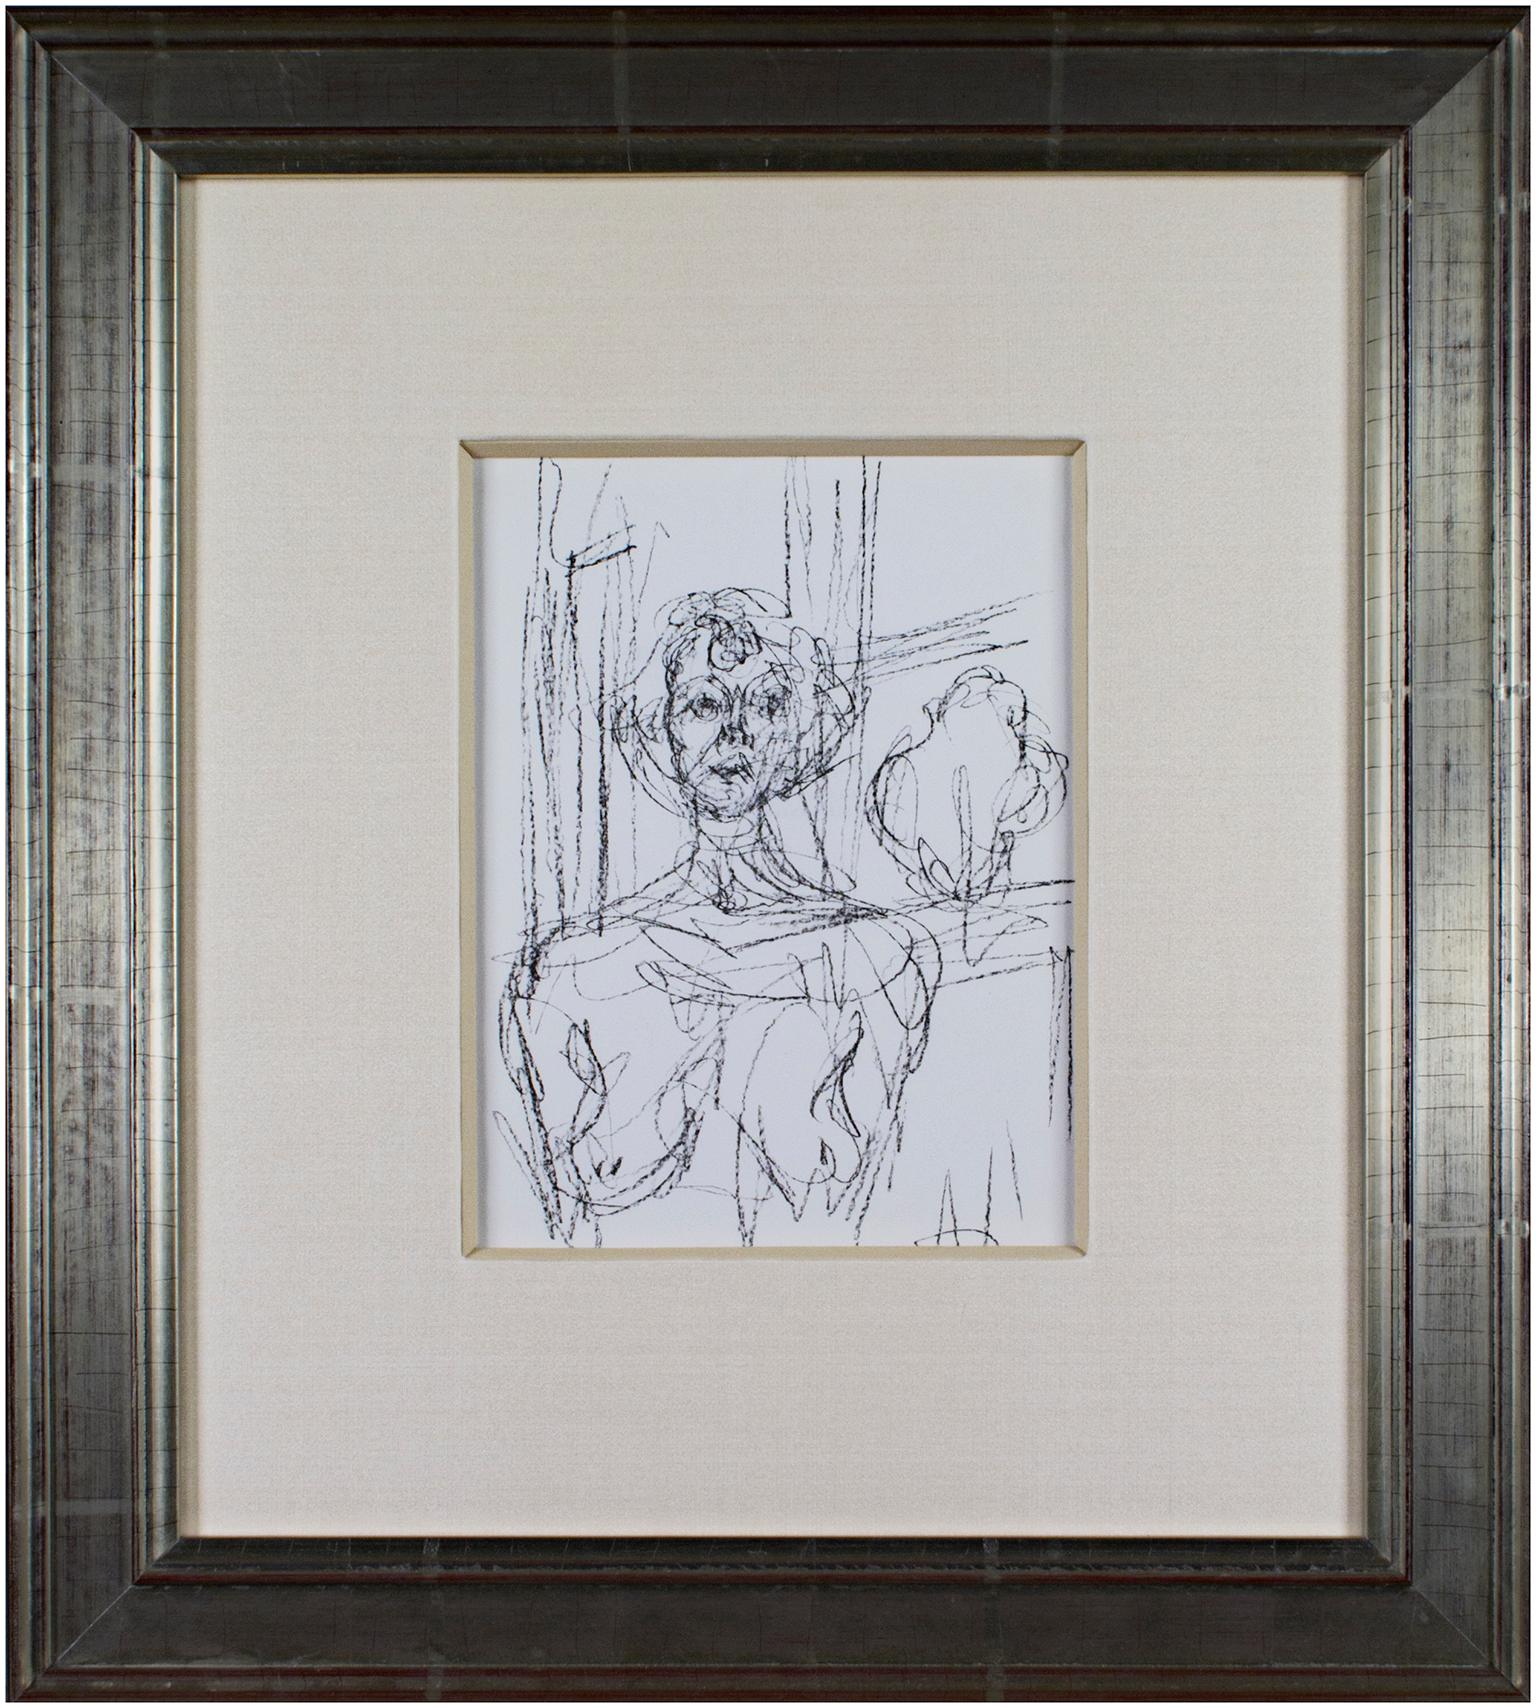 "Annette" is an original black and white lithograph by Alberto Giacometti. It features the nude torso of a woman in an interior. 

lithograph in black on Rives wove paper
10" x 7 1/2" art
20 1/2" x 18" frame
unsigned
from the edition of